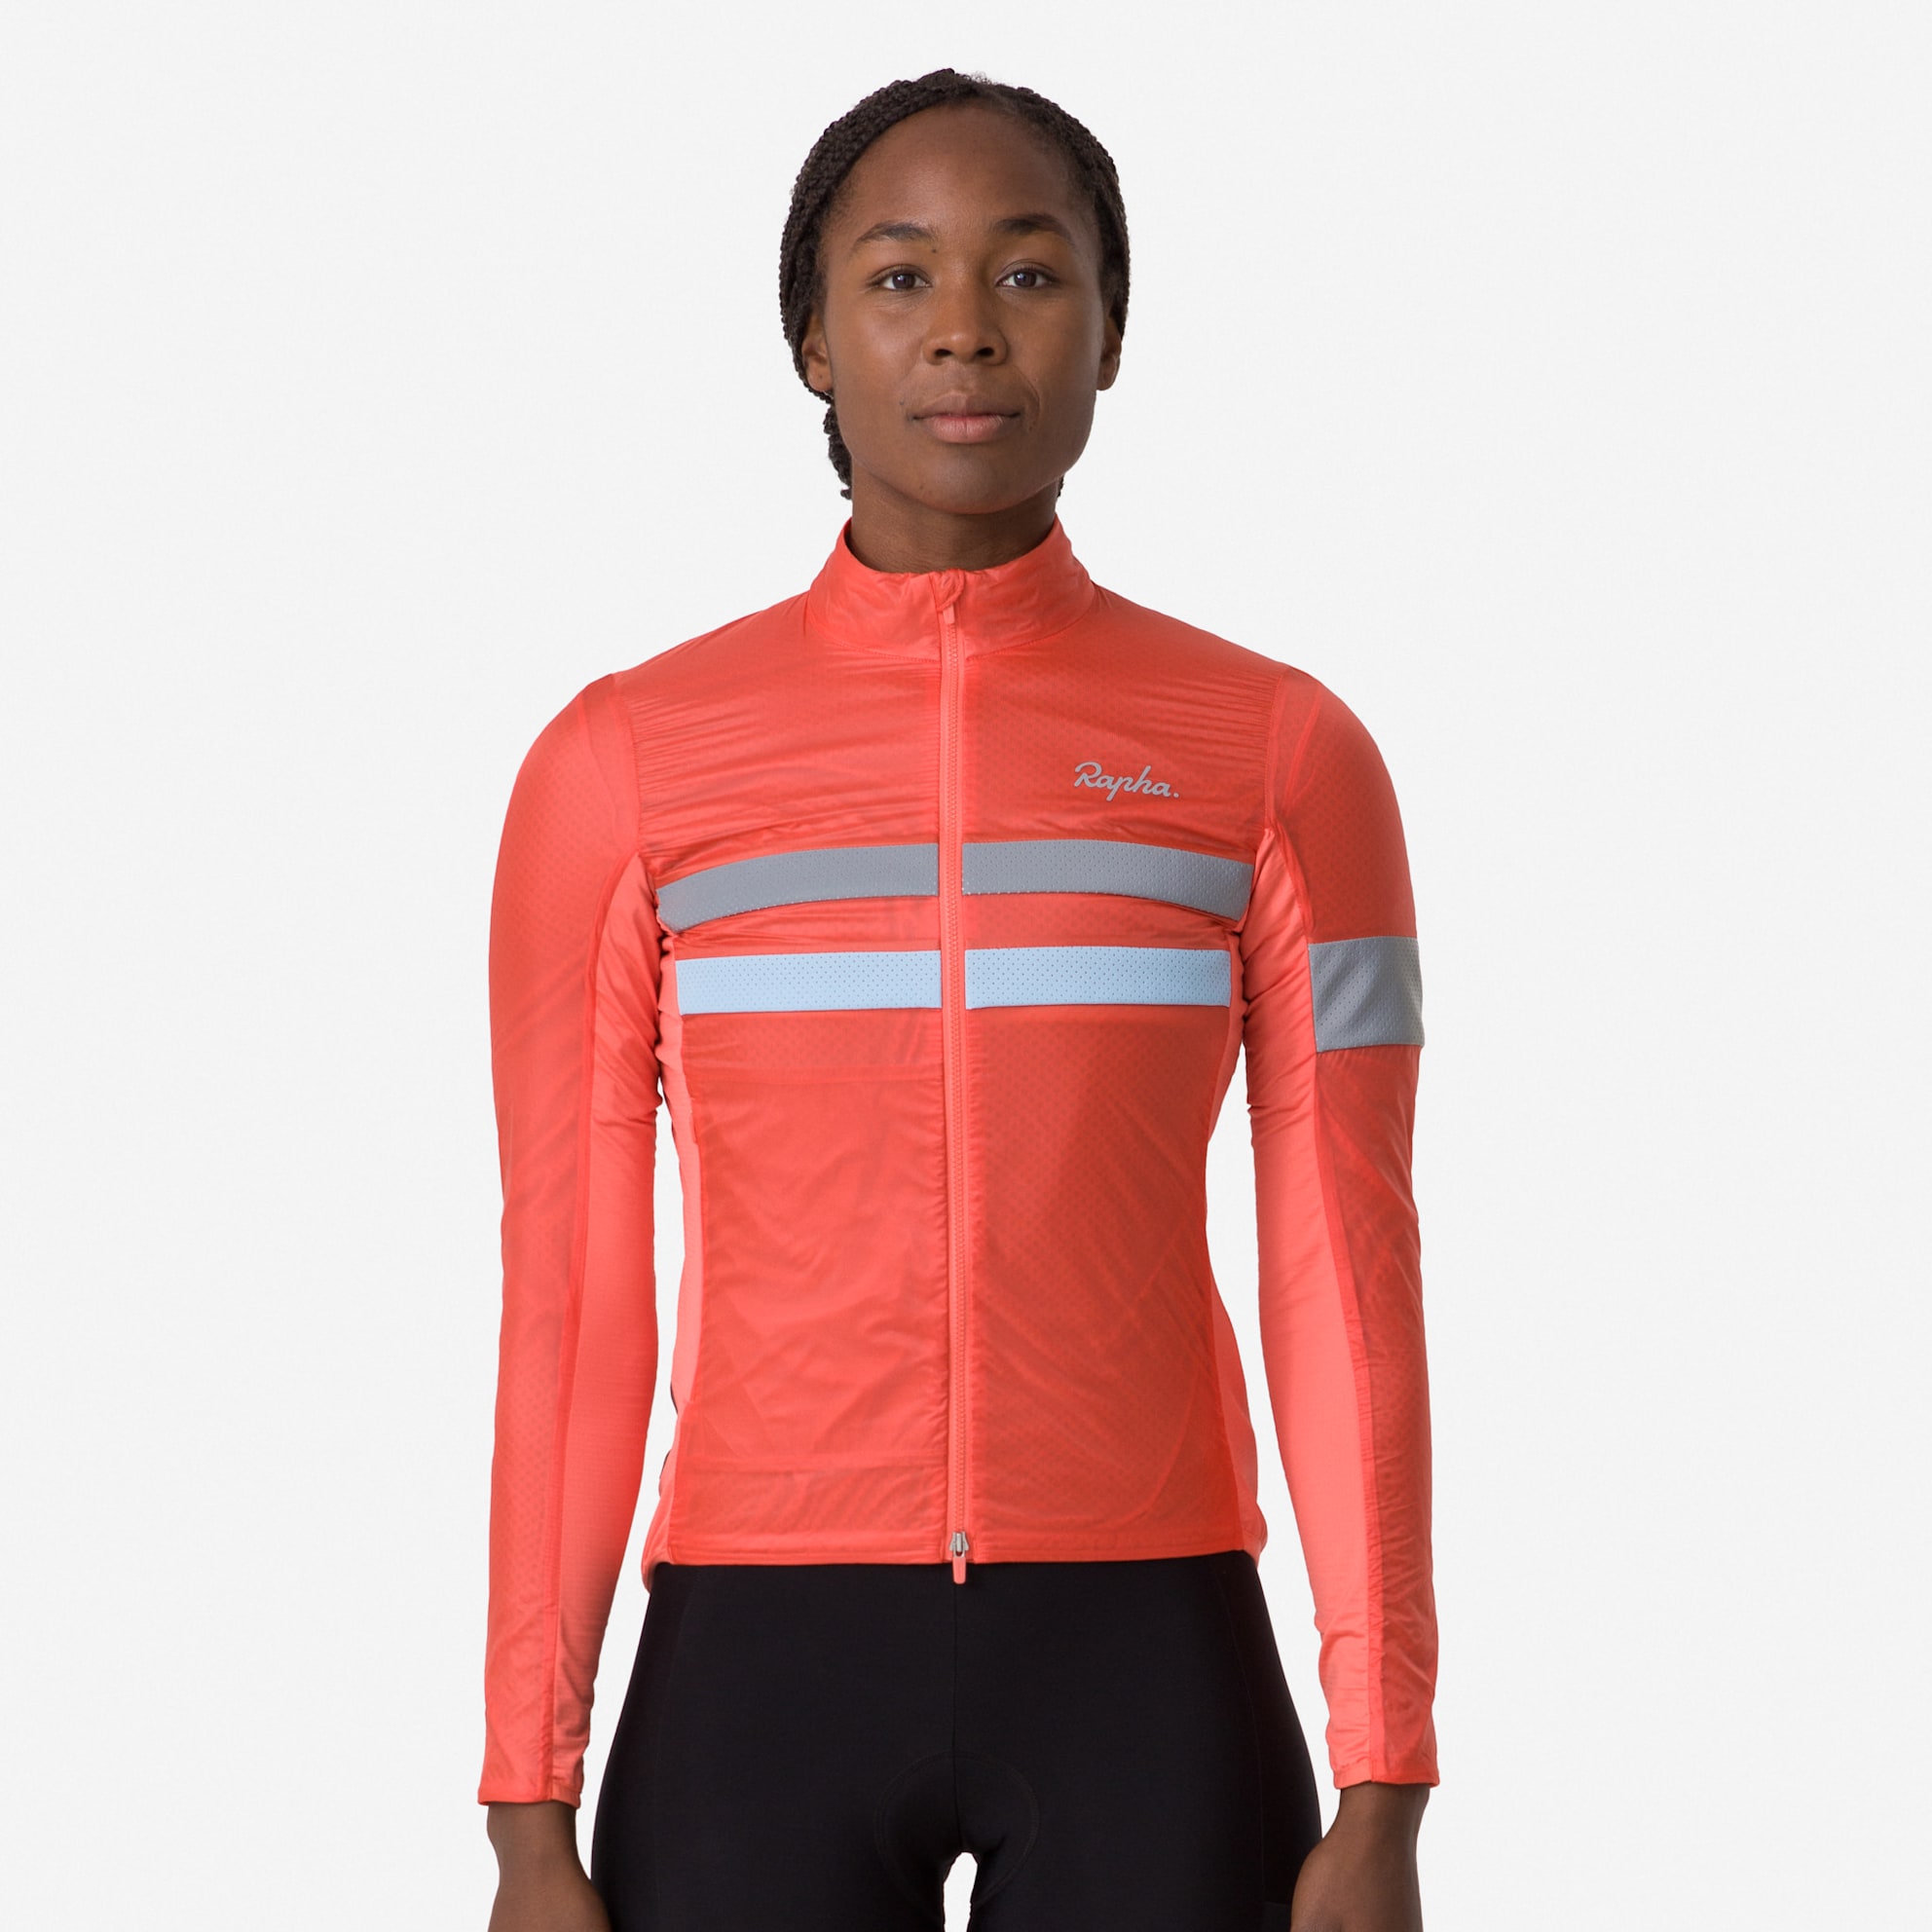 Women's Cycling Jerseys, Clothing & Accessories | Rapha